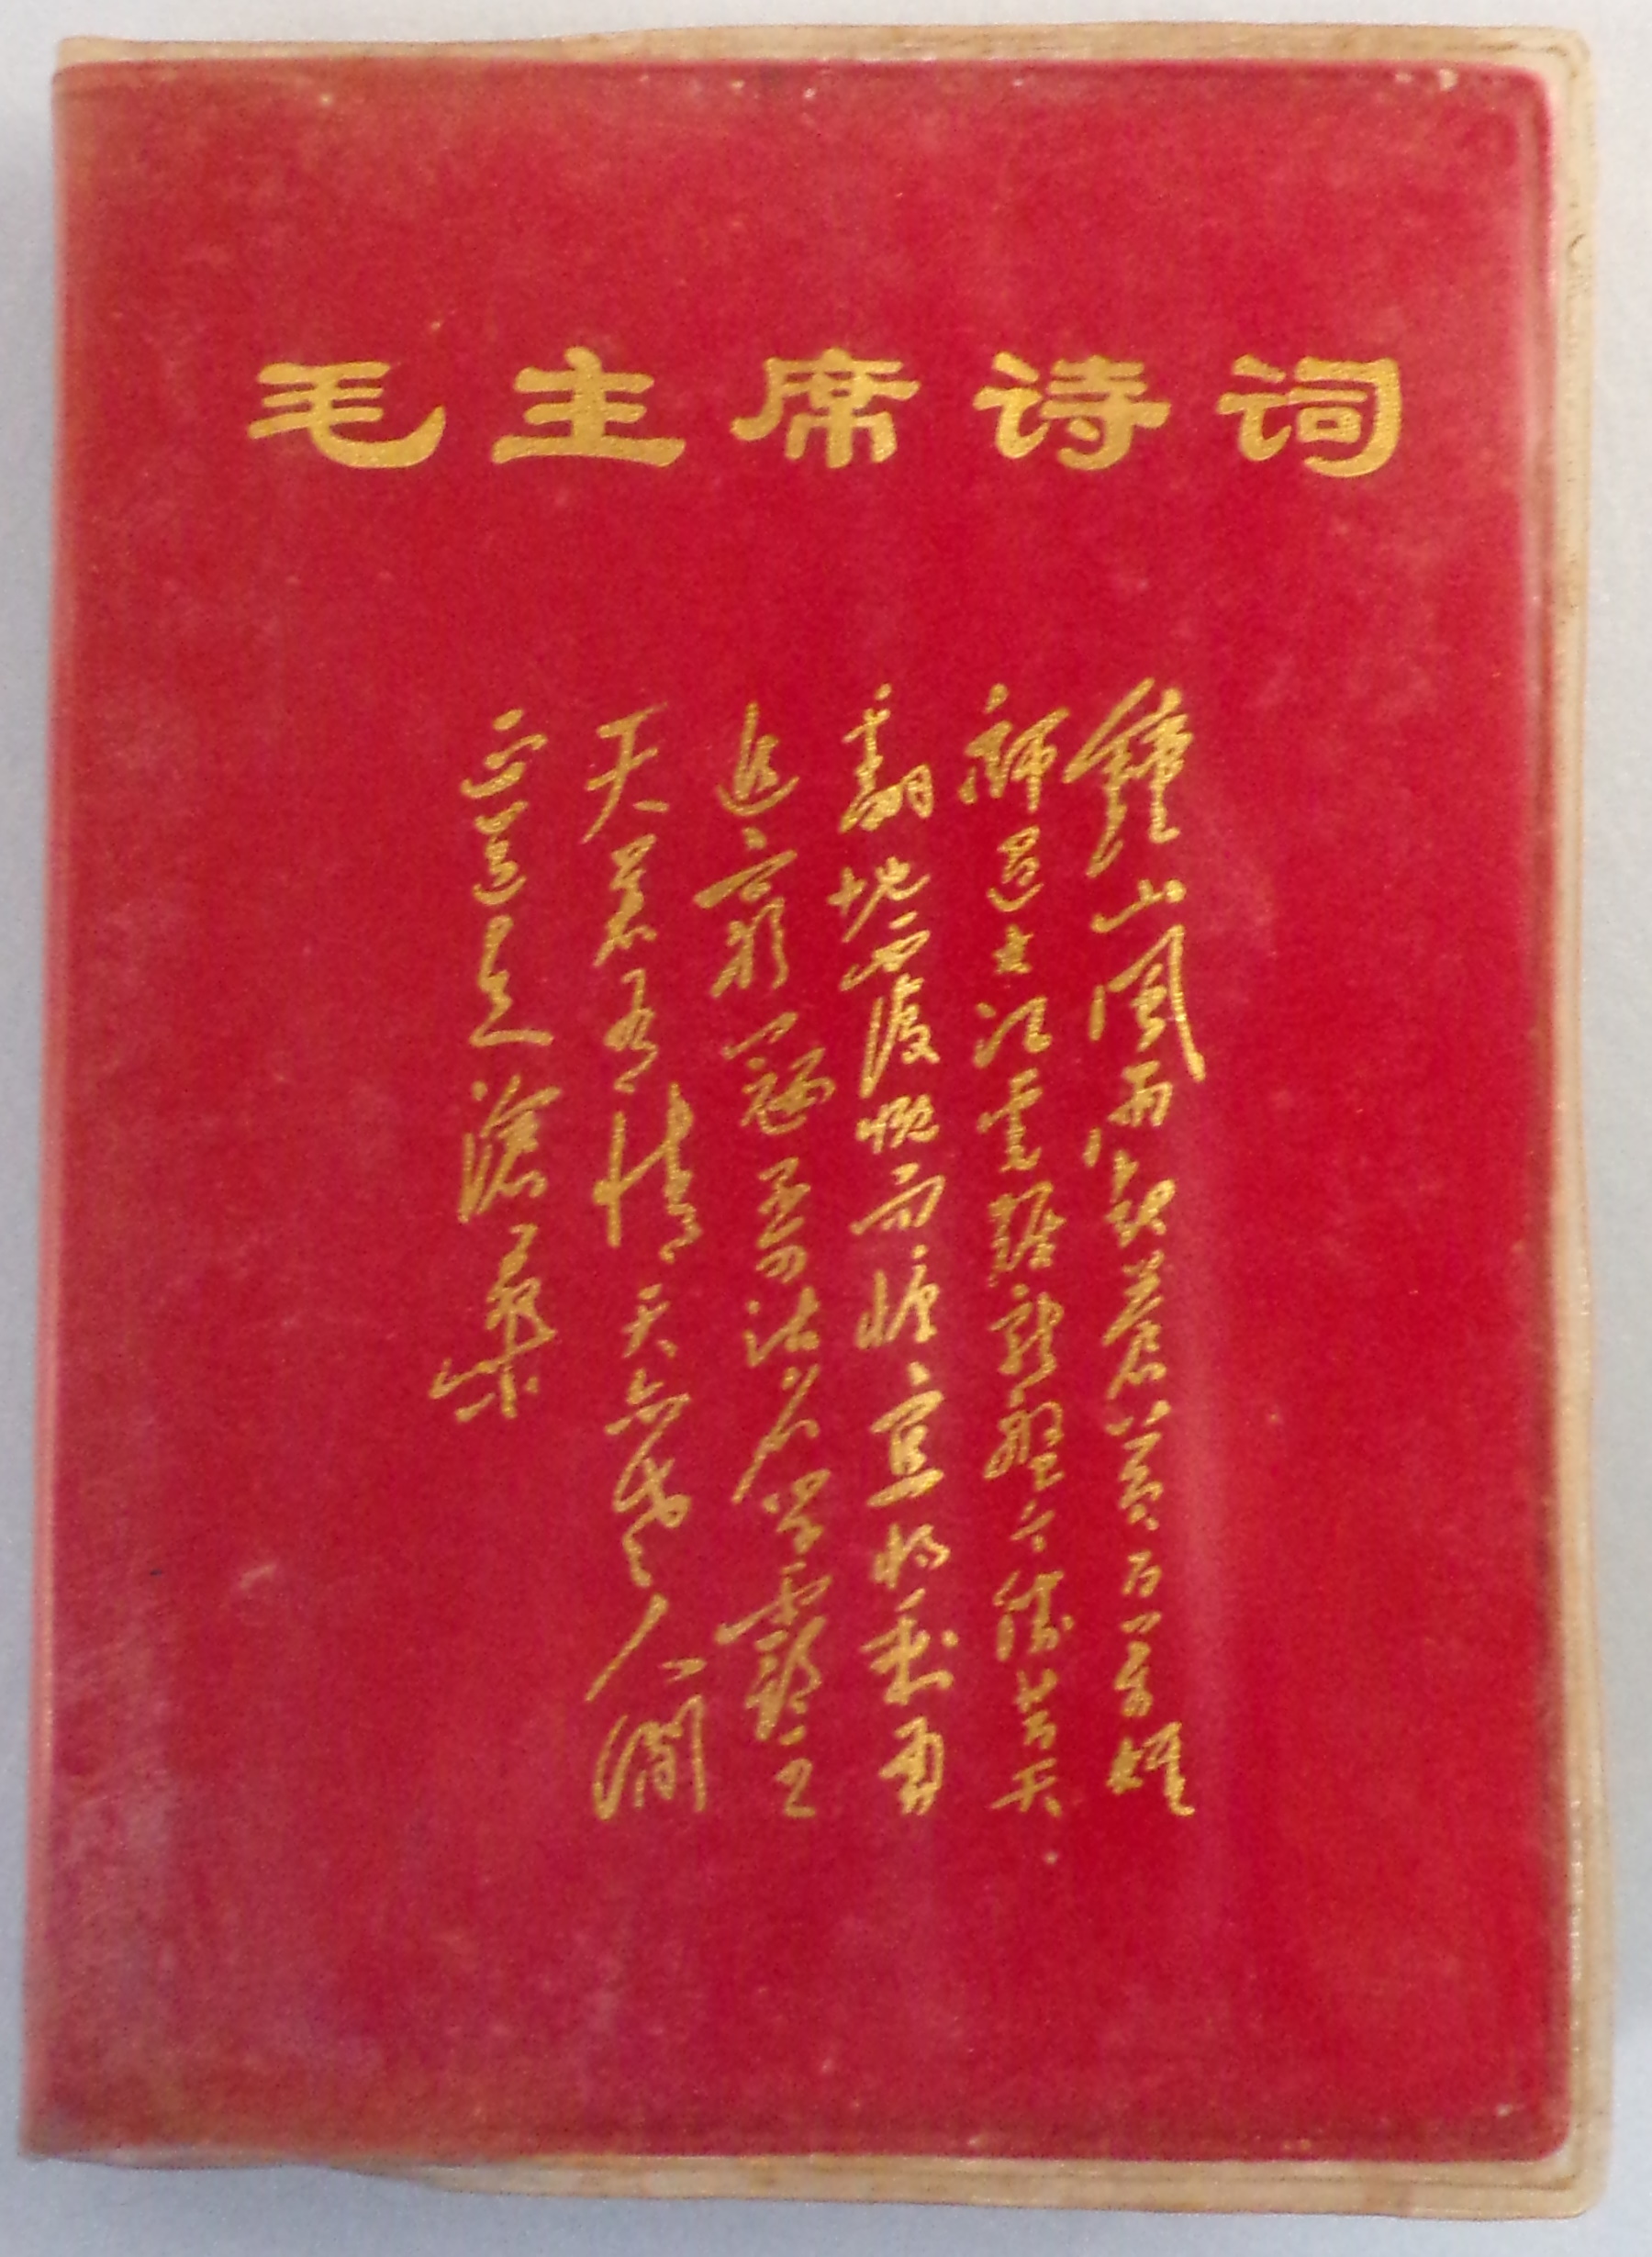 Mao’s Red Book of Poems 毛主席诗词